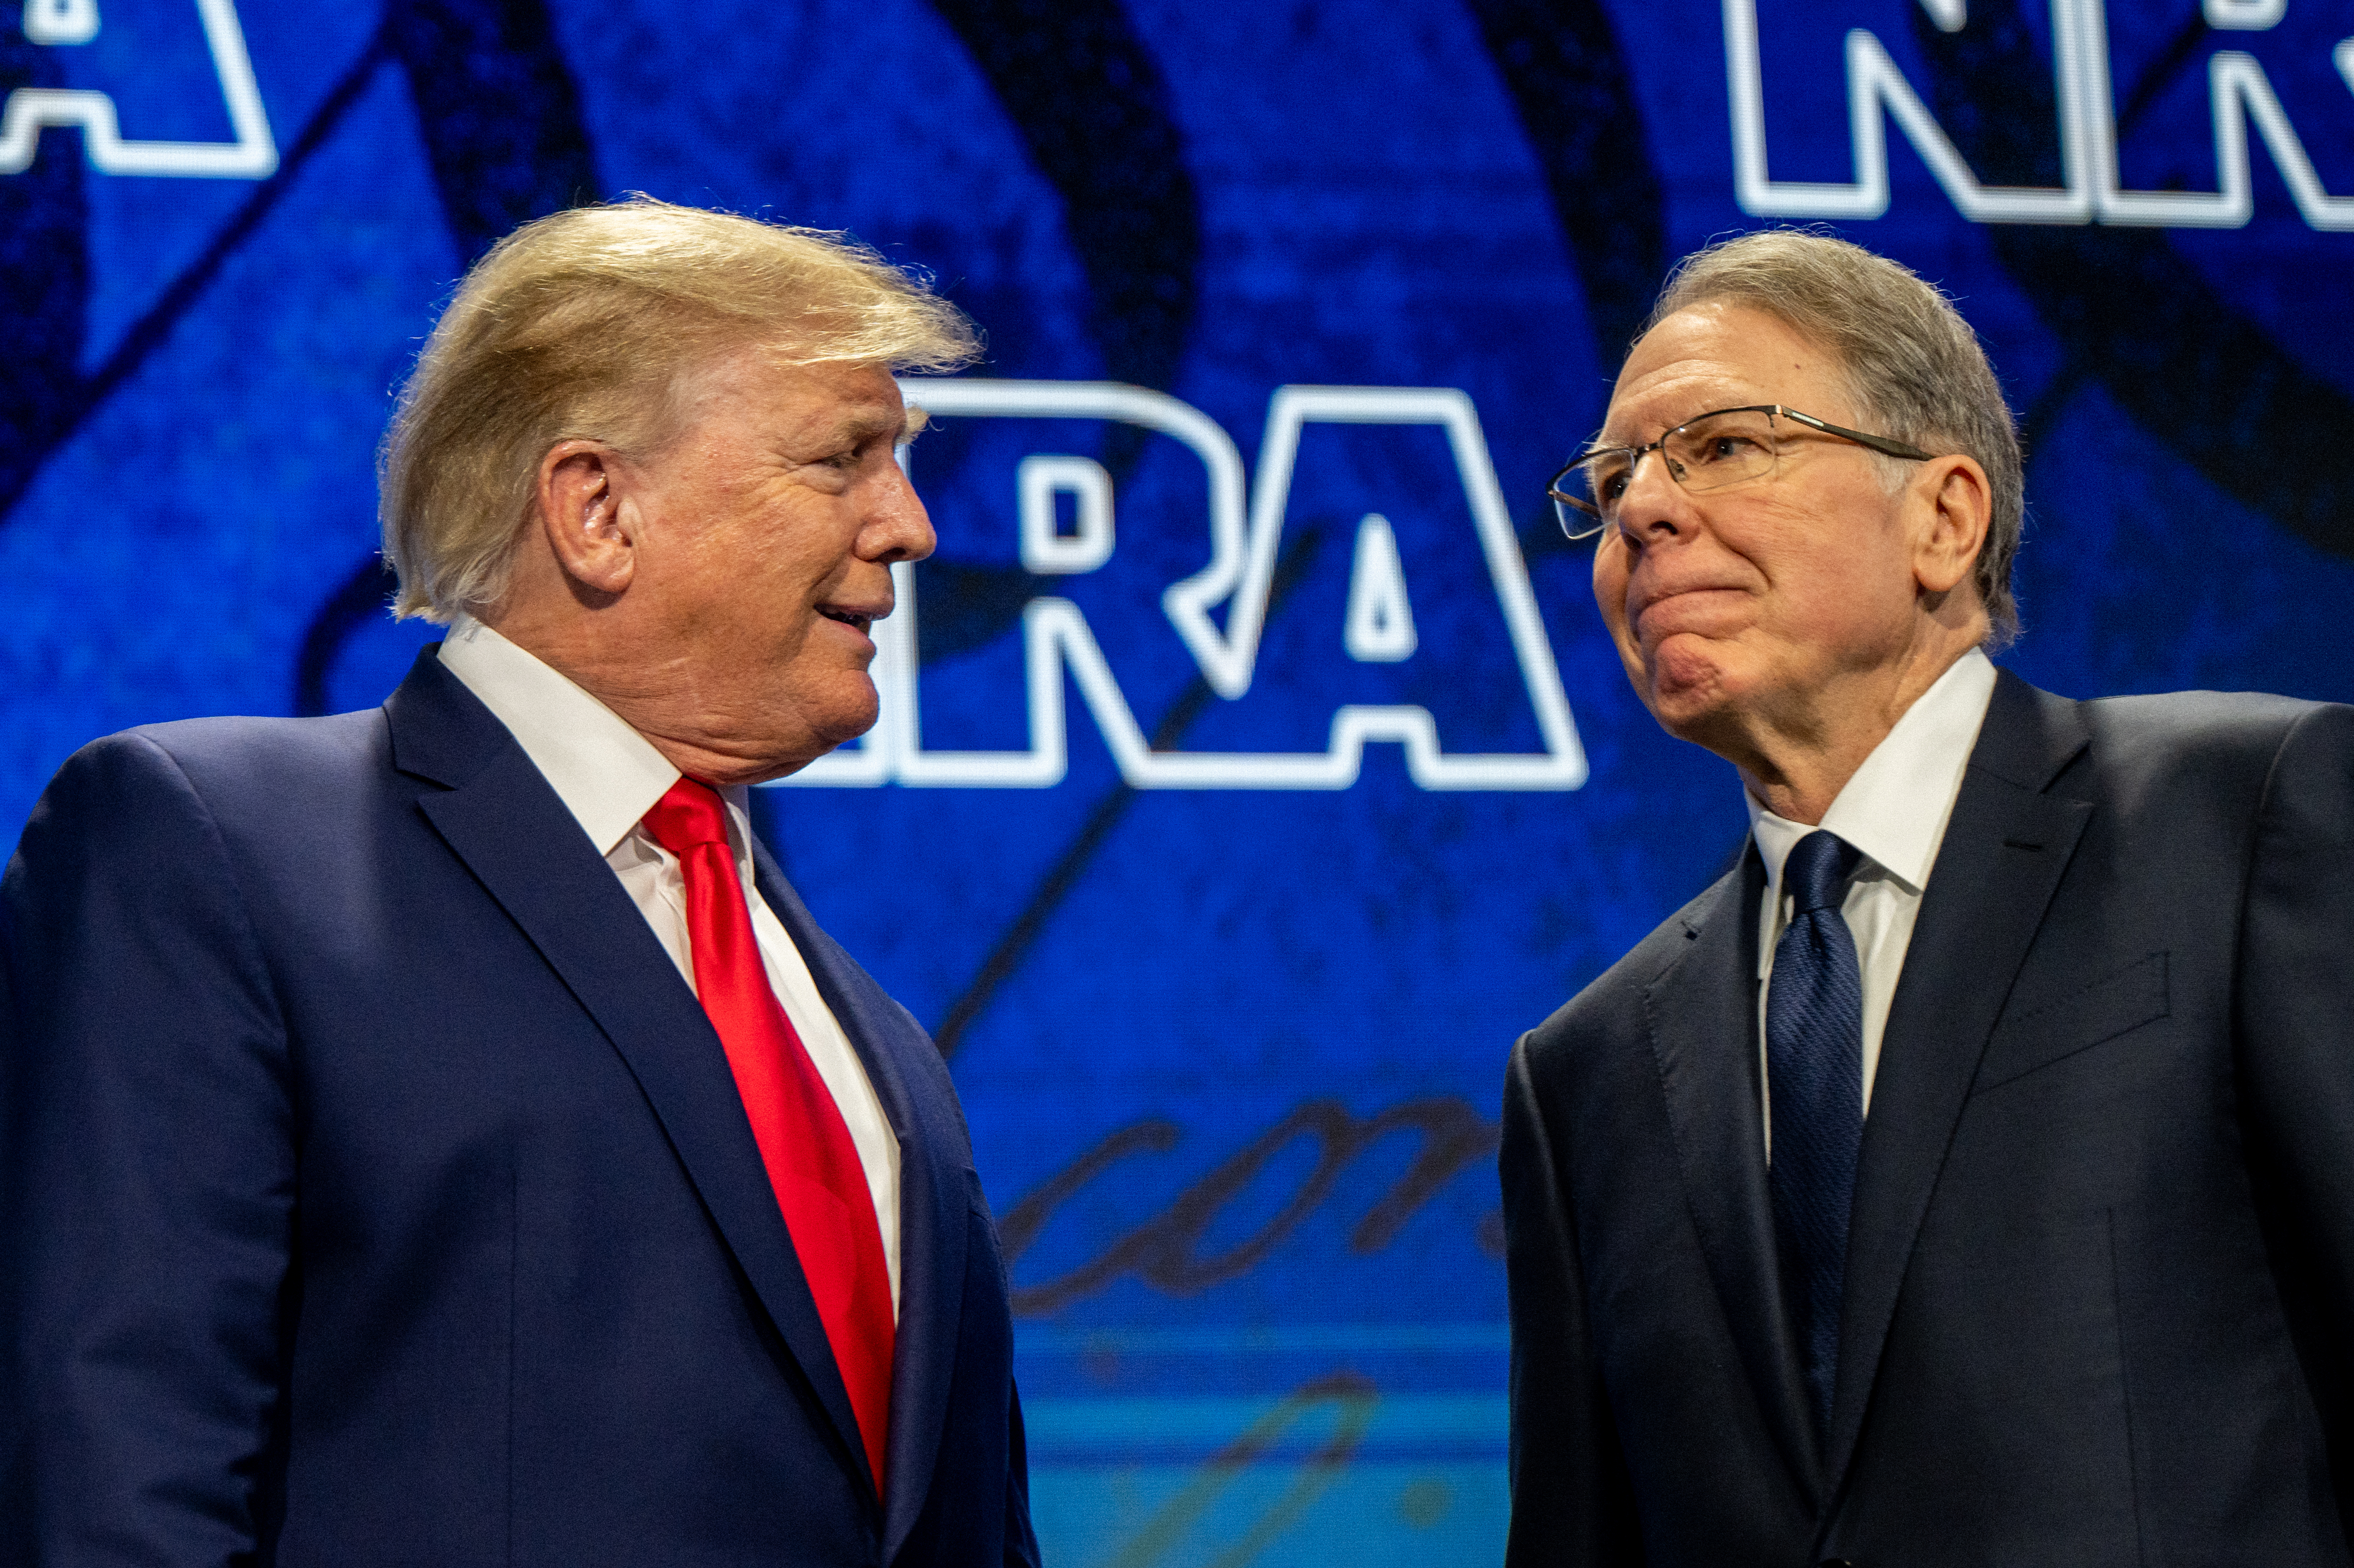 Donald Trump and NRA CEO Wayne LaPierre in front of a blue NRA backdrop on a stage.